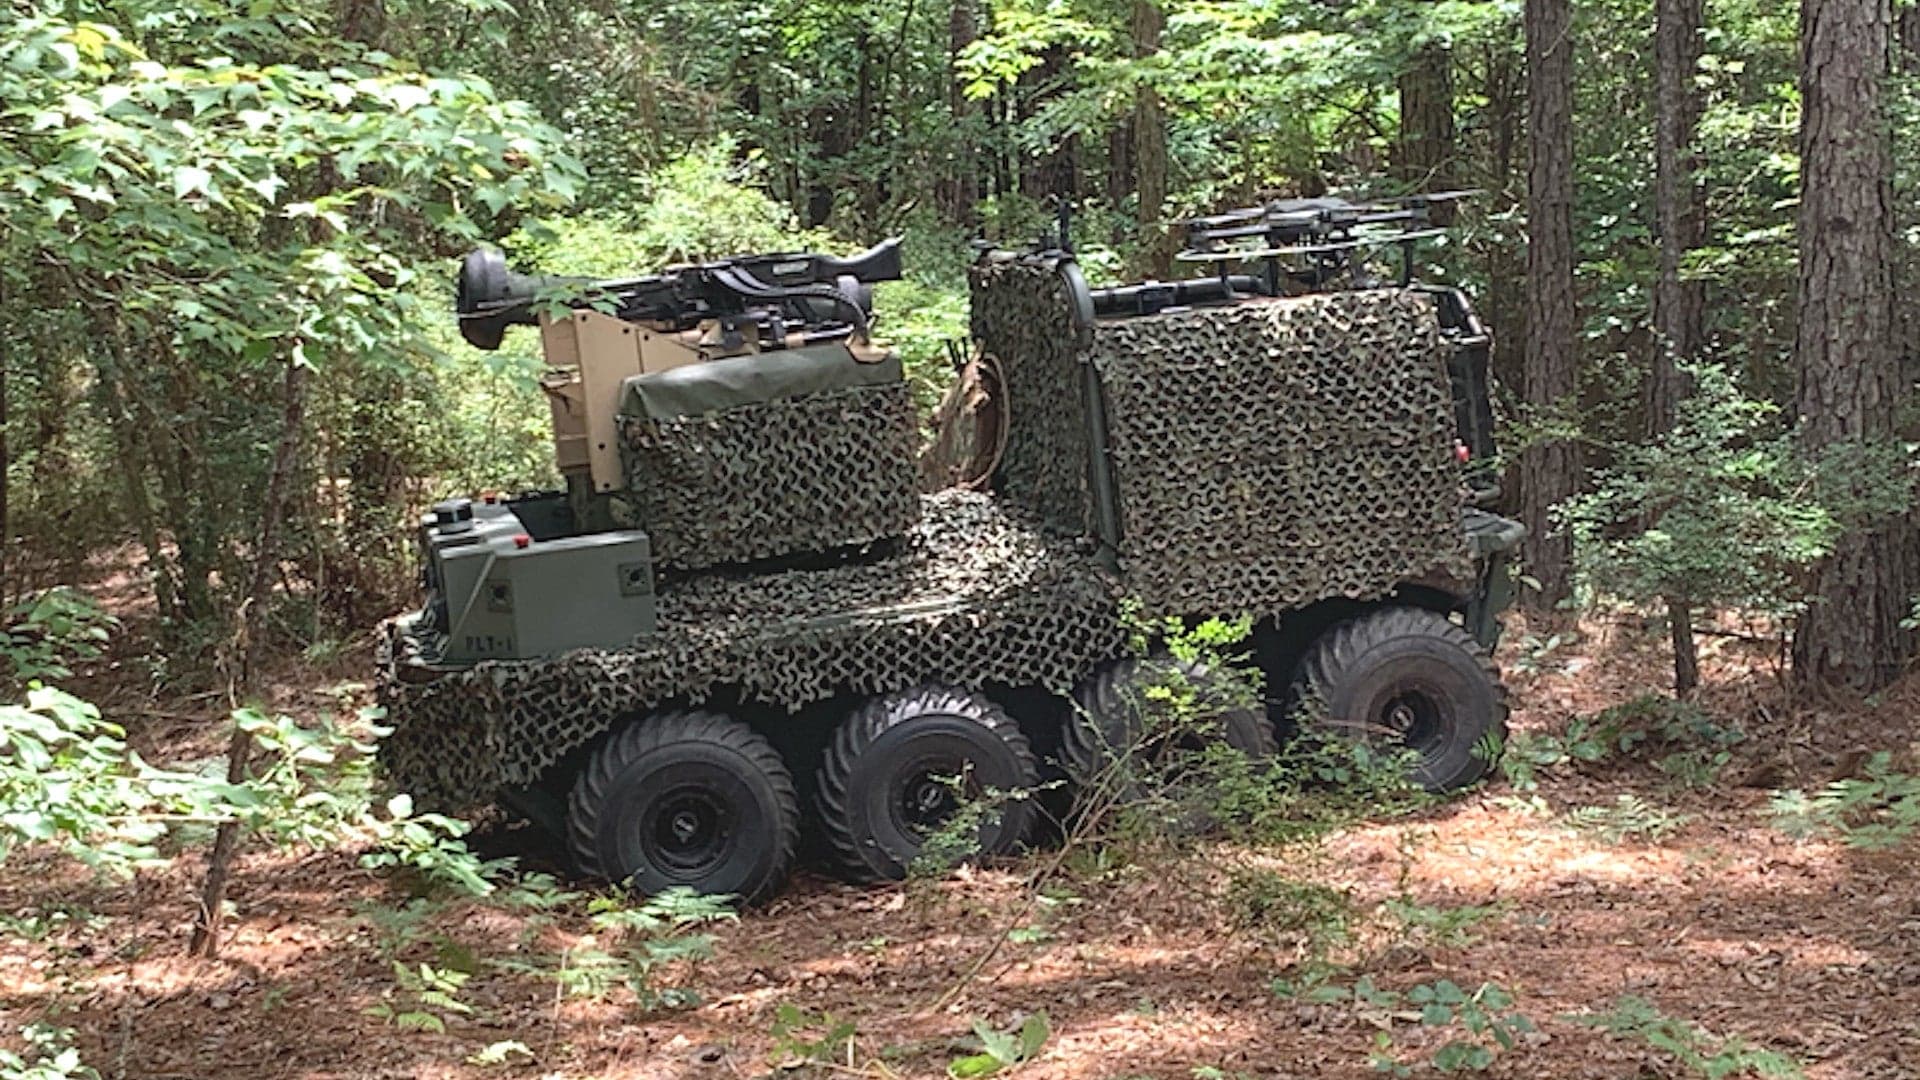 ‘Enemy’ Unmanned Ground Vehicles Are Now Facing-Off Against Army Soldiers In Training